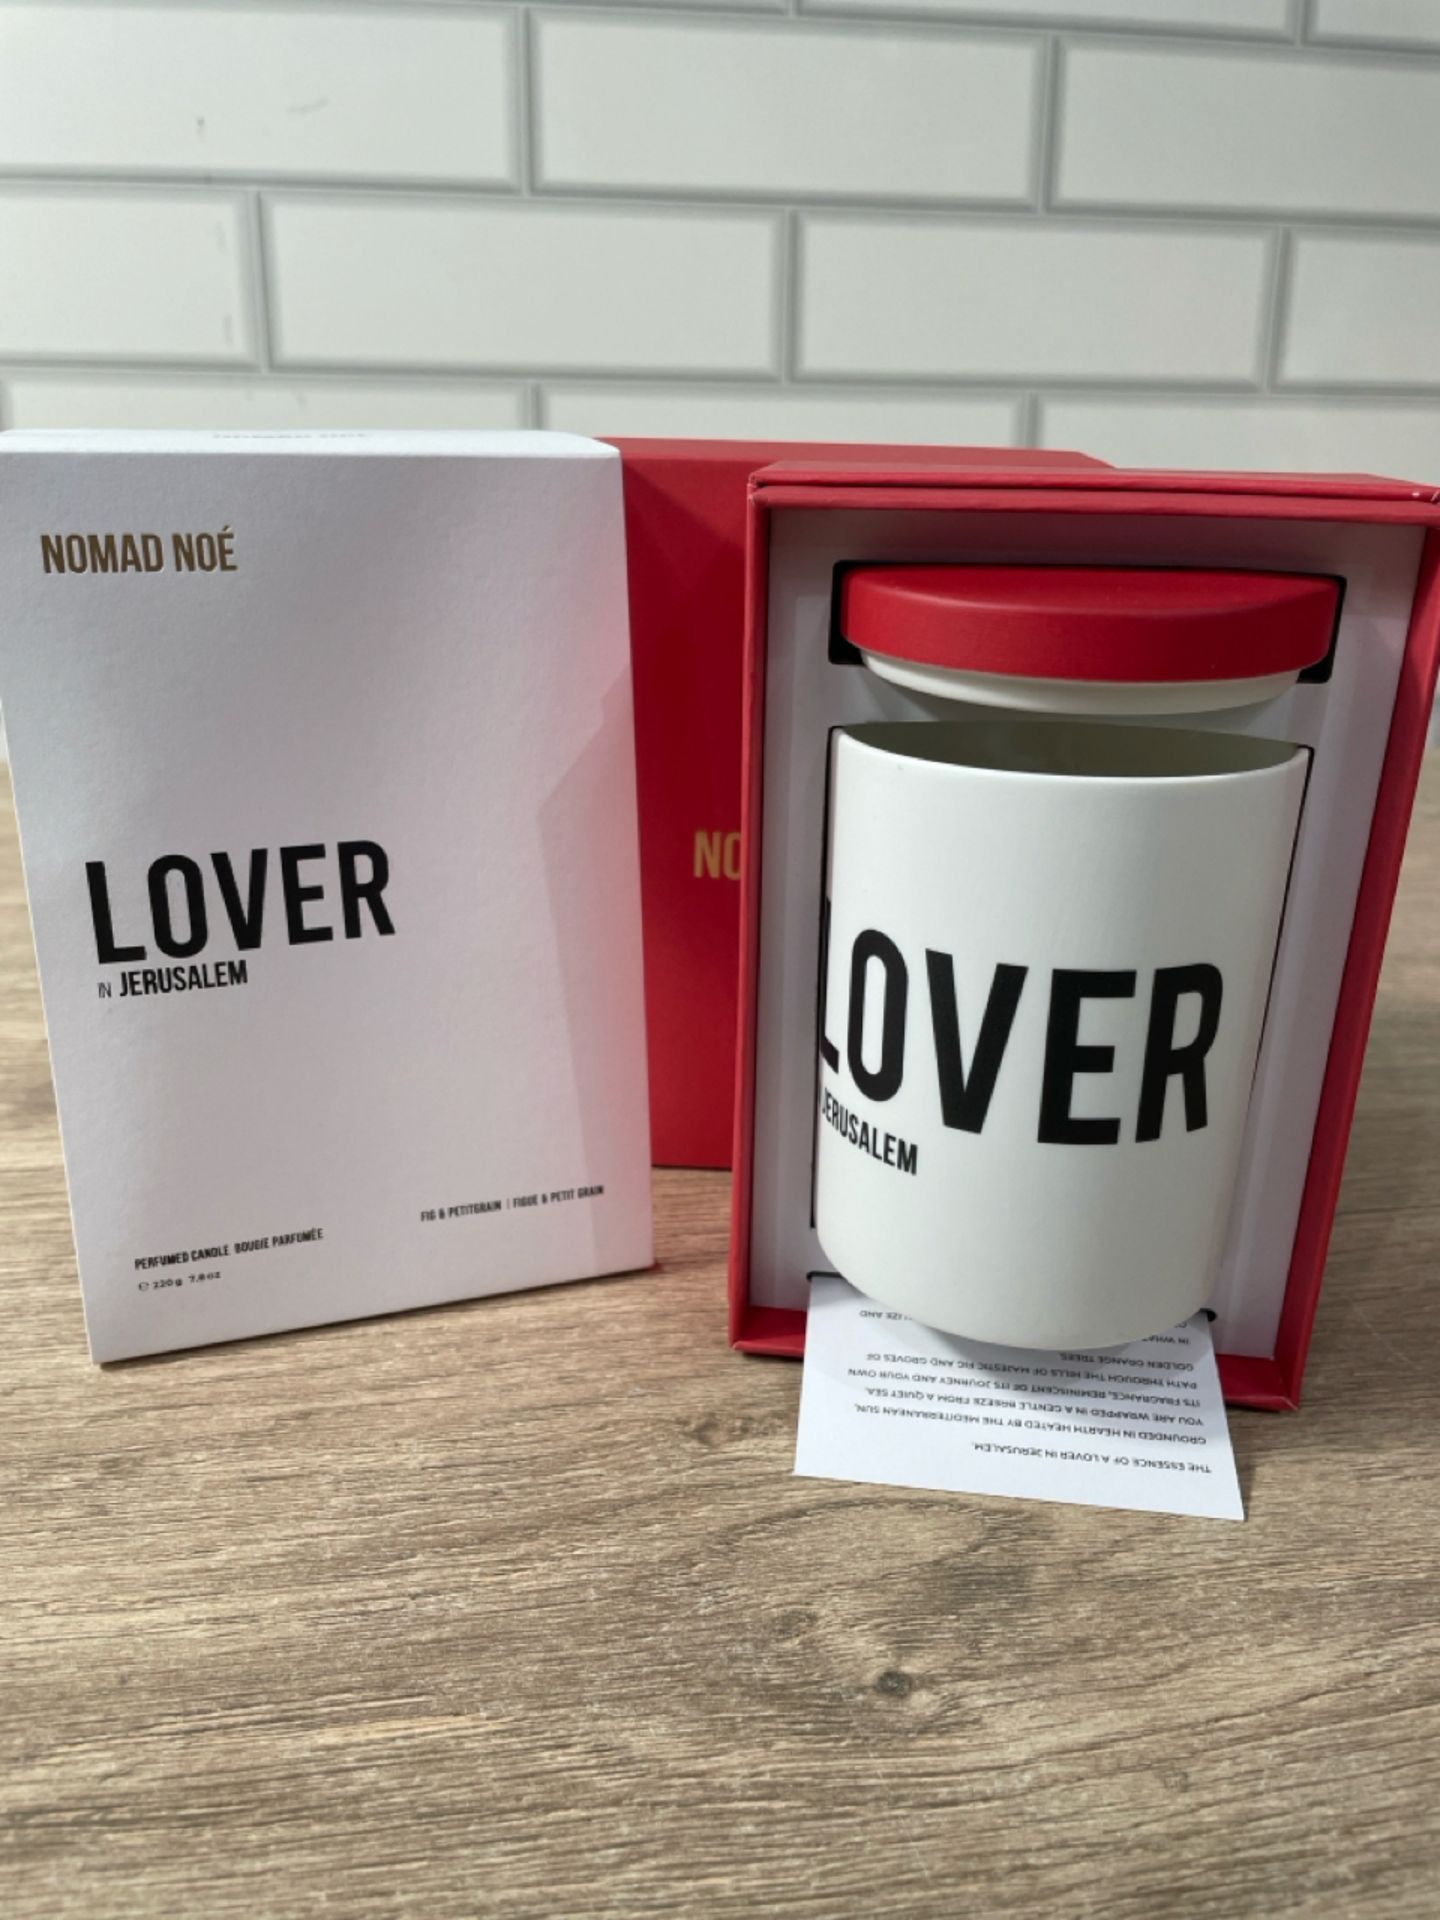 Lover Scented Candle from Nomad Noe - Image 2 of 4